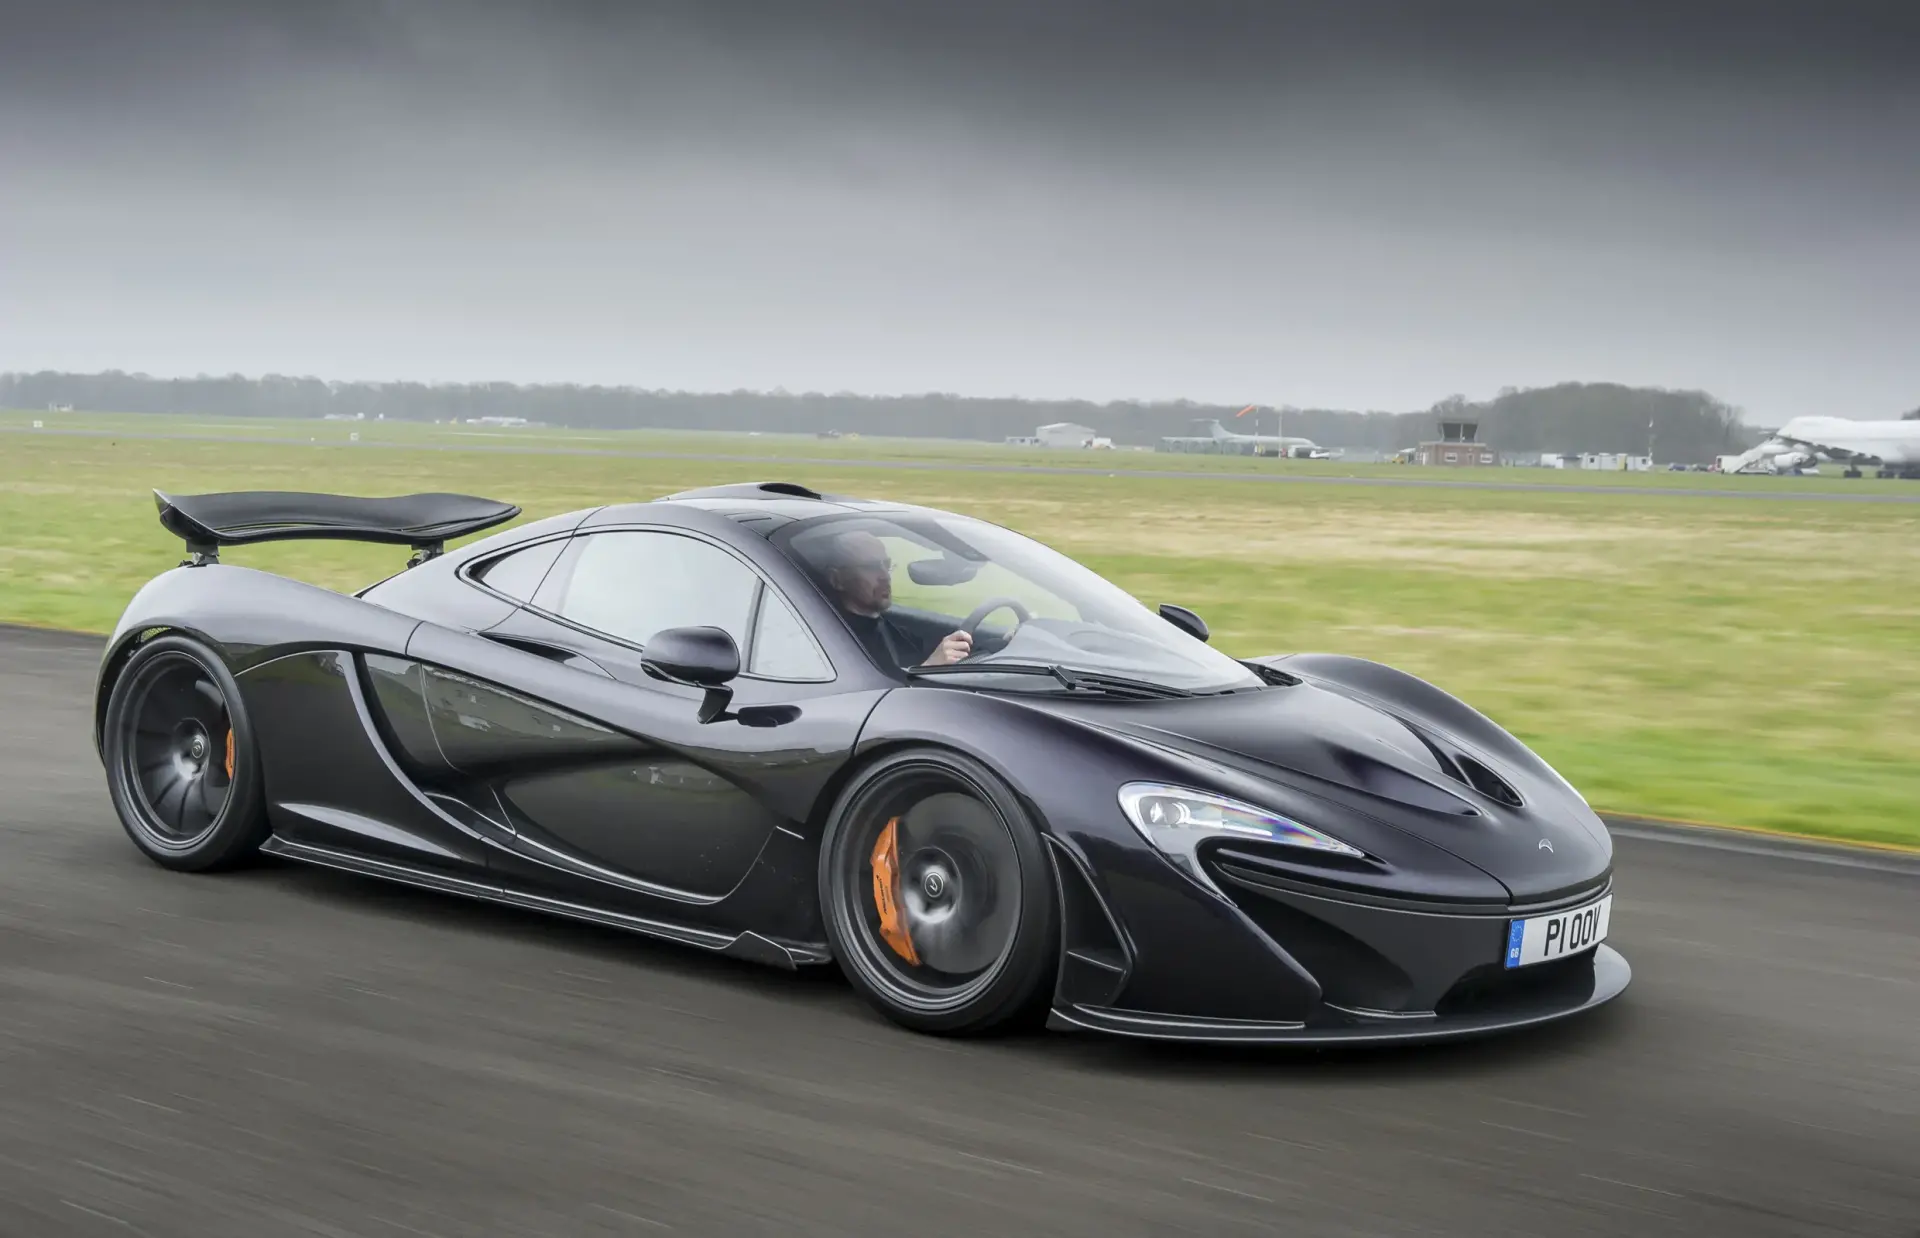 The World's Fastest Sports Cars, Based on Quarter-Mile Times